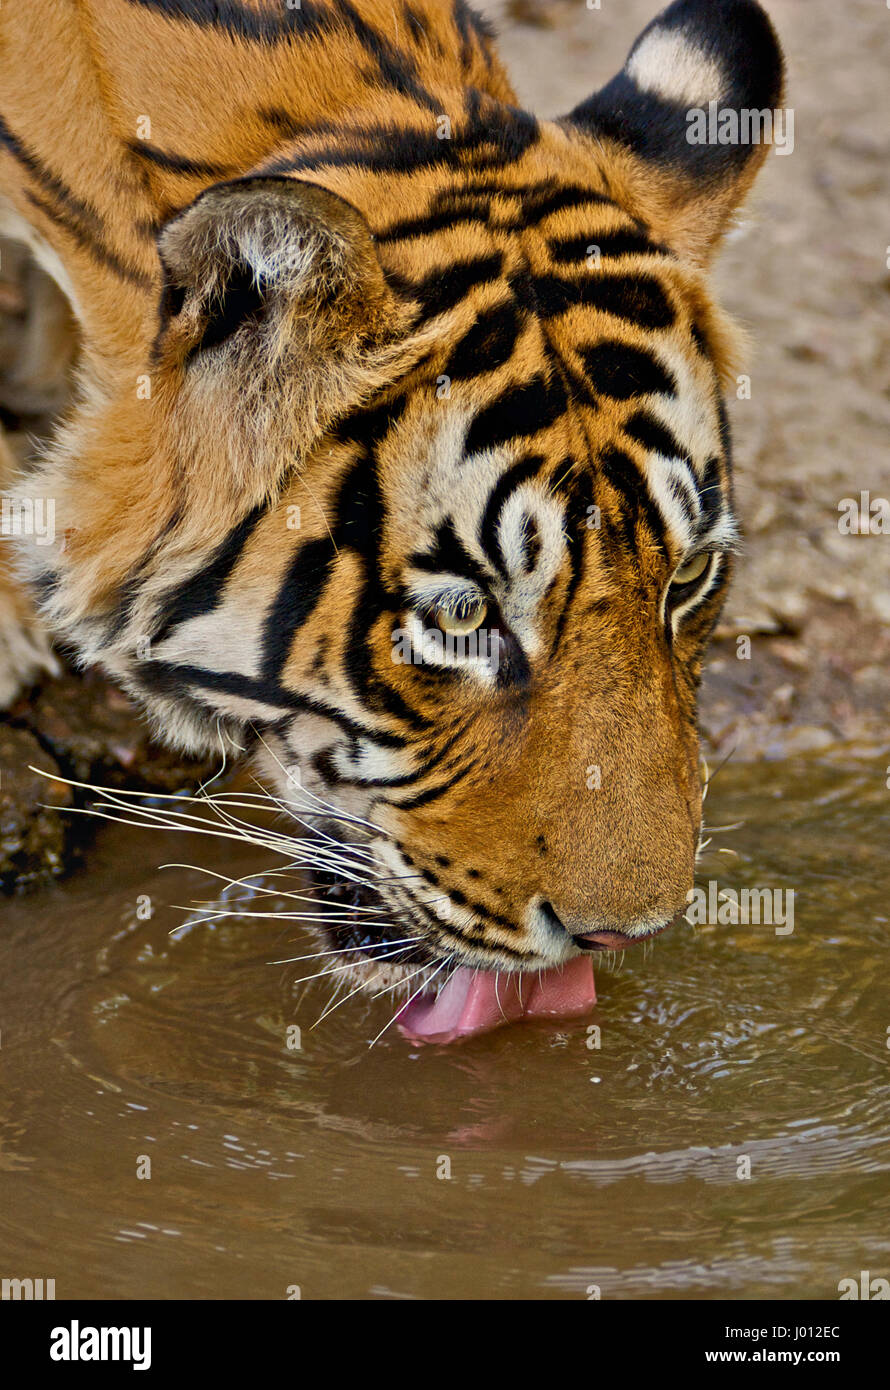 Wild tiger drinking water from a small pond in Ranthambhore national park of India Stock Photo